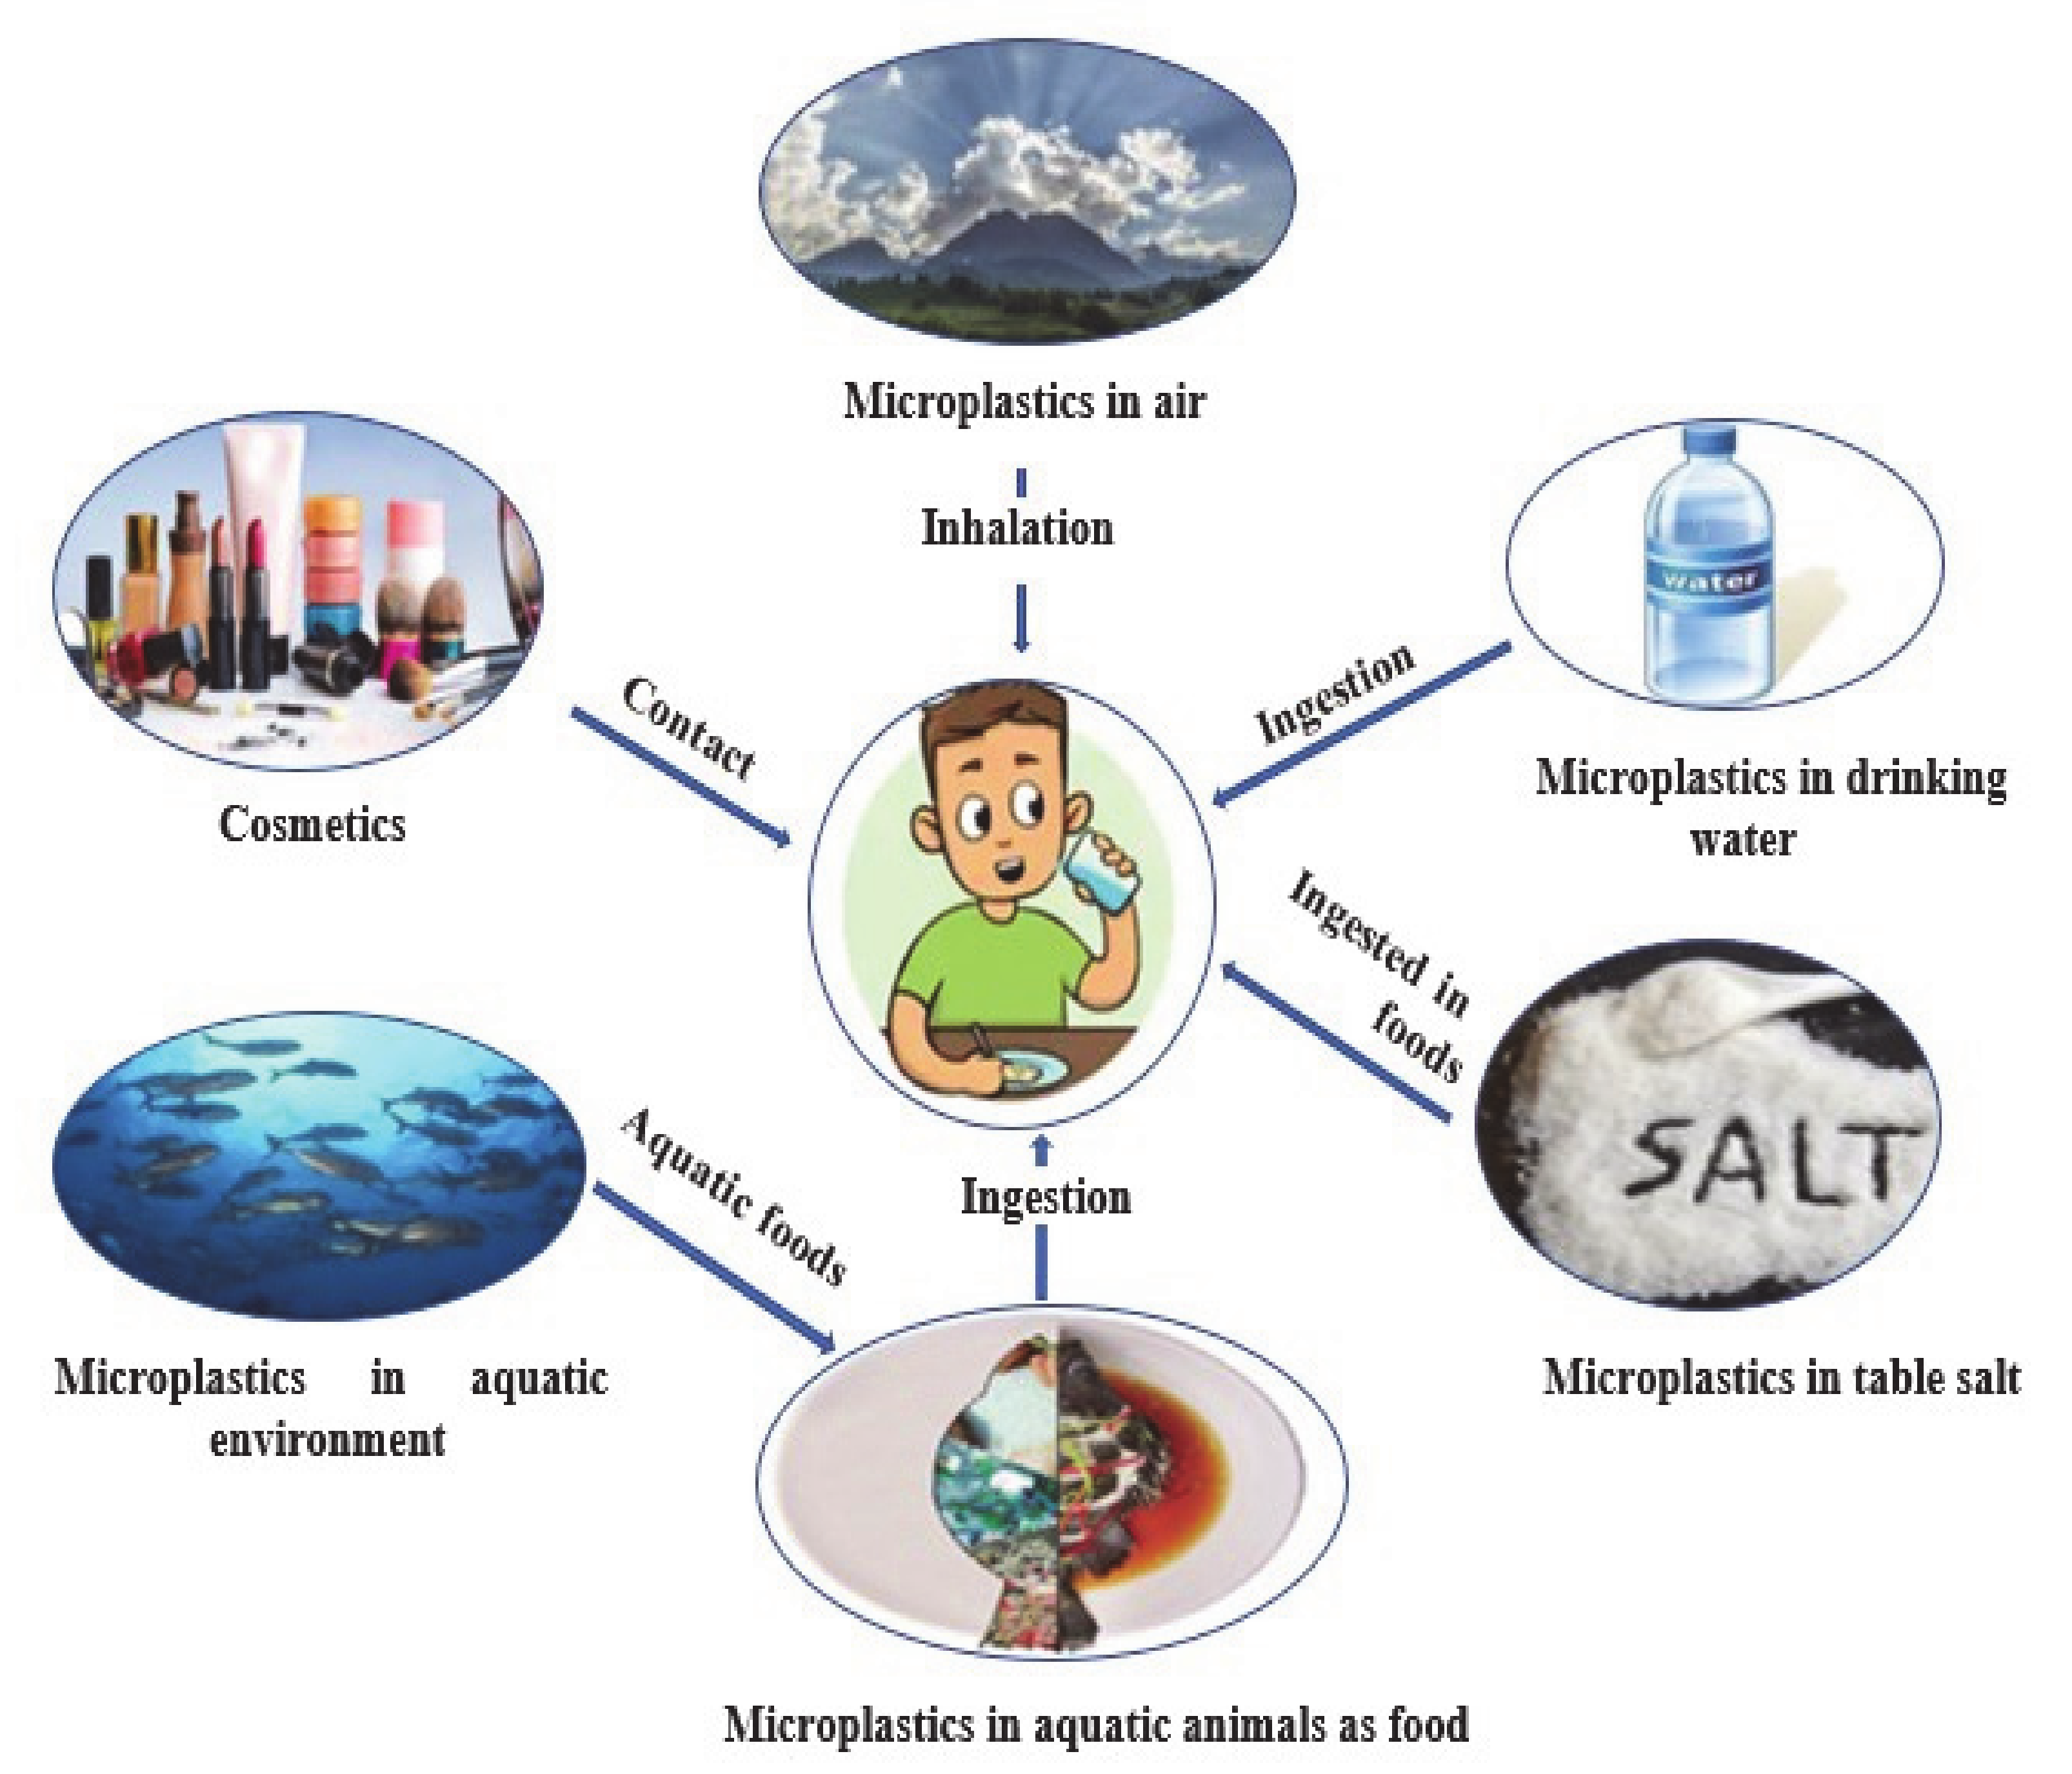 IJERPH | Free Full-Text | Microplastics Pollution as an Invisible Potential  Threat to Food Safety and Security, Policy Challenges and the Way Forward